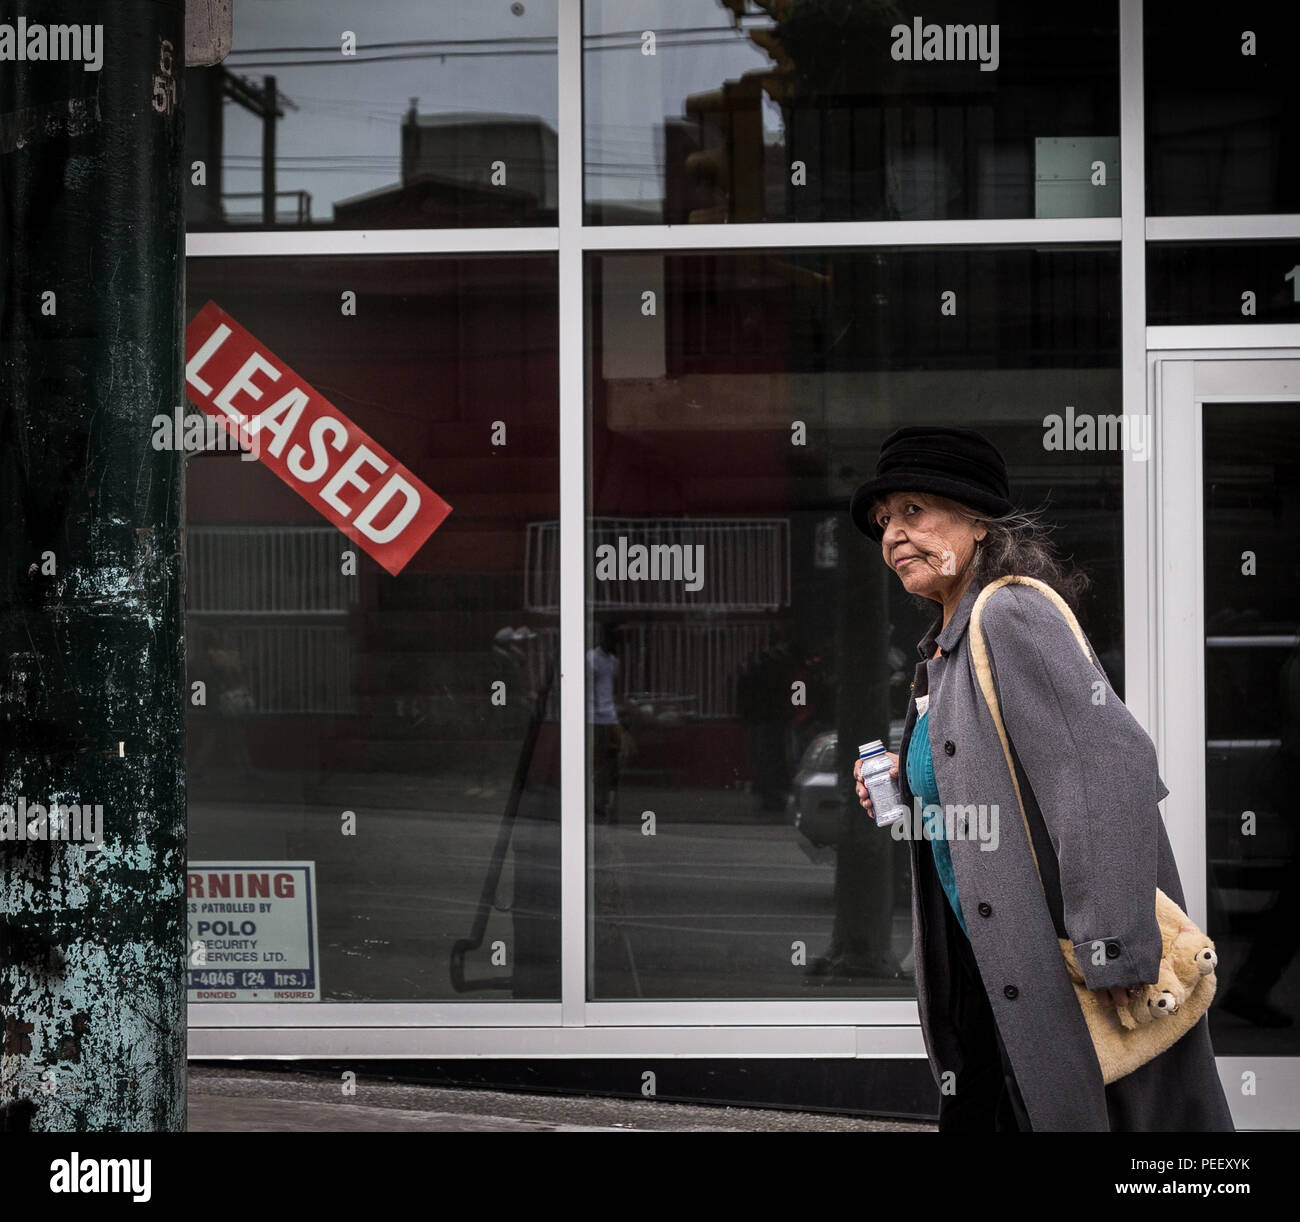 VANCOUVER, BC, CANADA - MAY 11, 2016: A woman walks past a newly leased retail space in Vancouver's Downtown Eastside an area which is plagued with homelessness, drug use, and poverty. Stock Photo